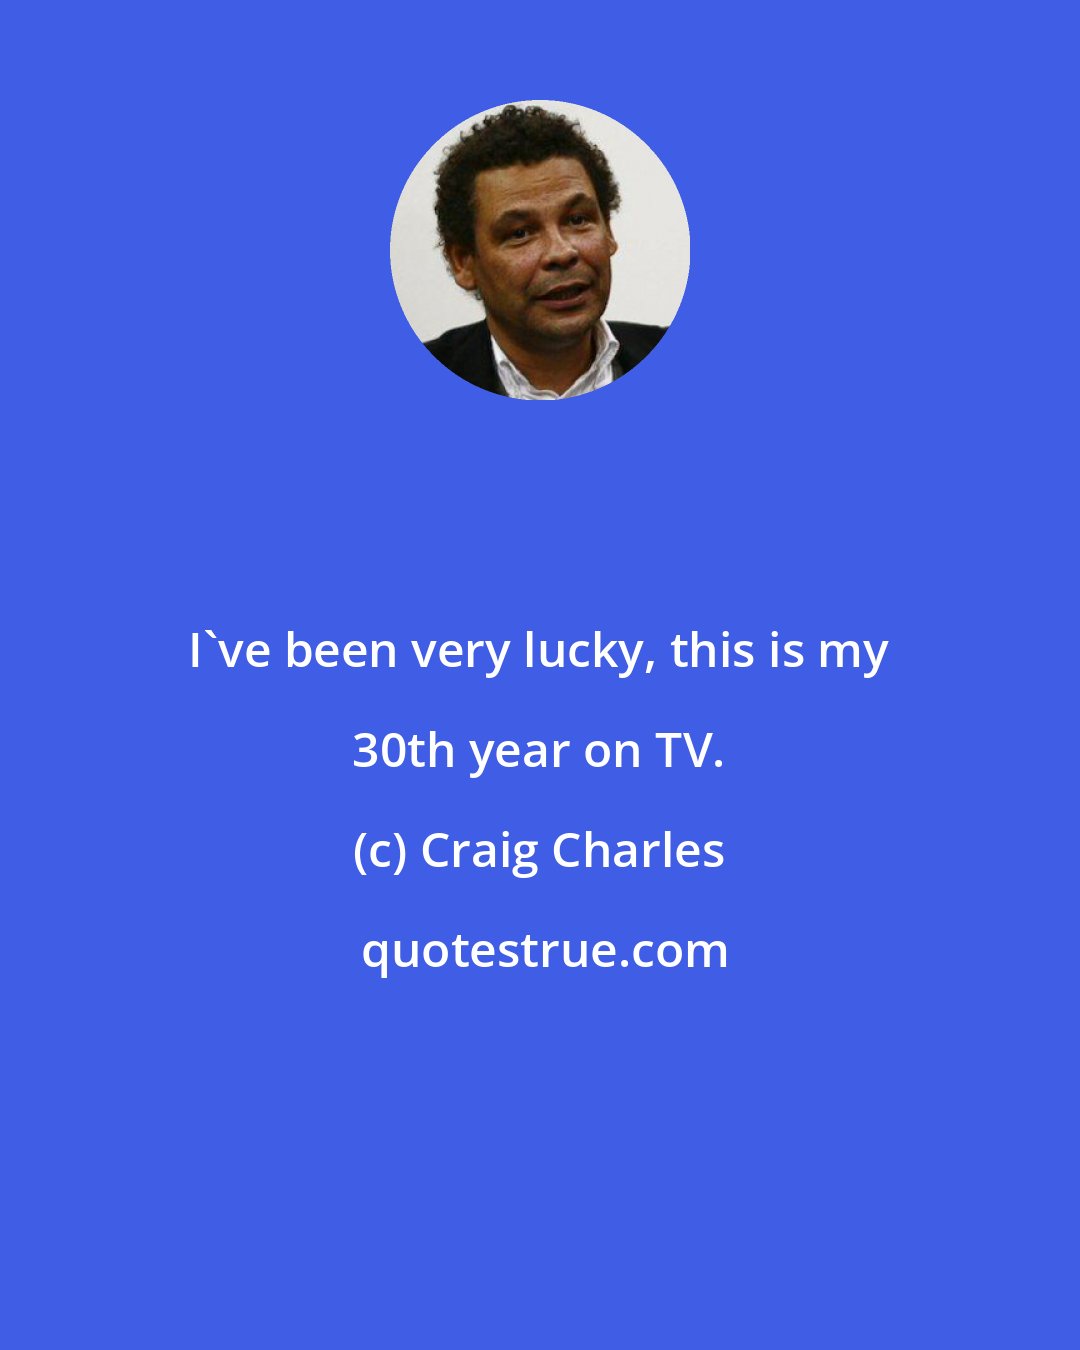 Craig Charles: I've been very lucky, this is my 30th year on TV.